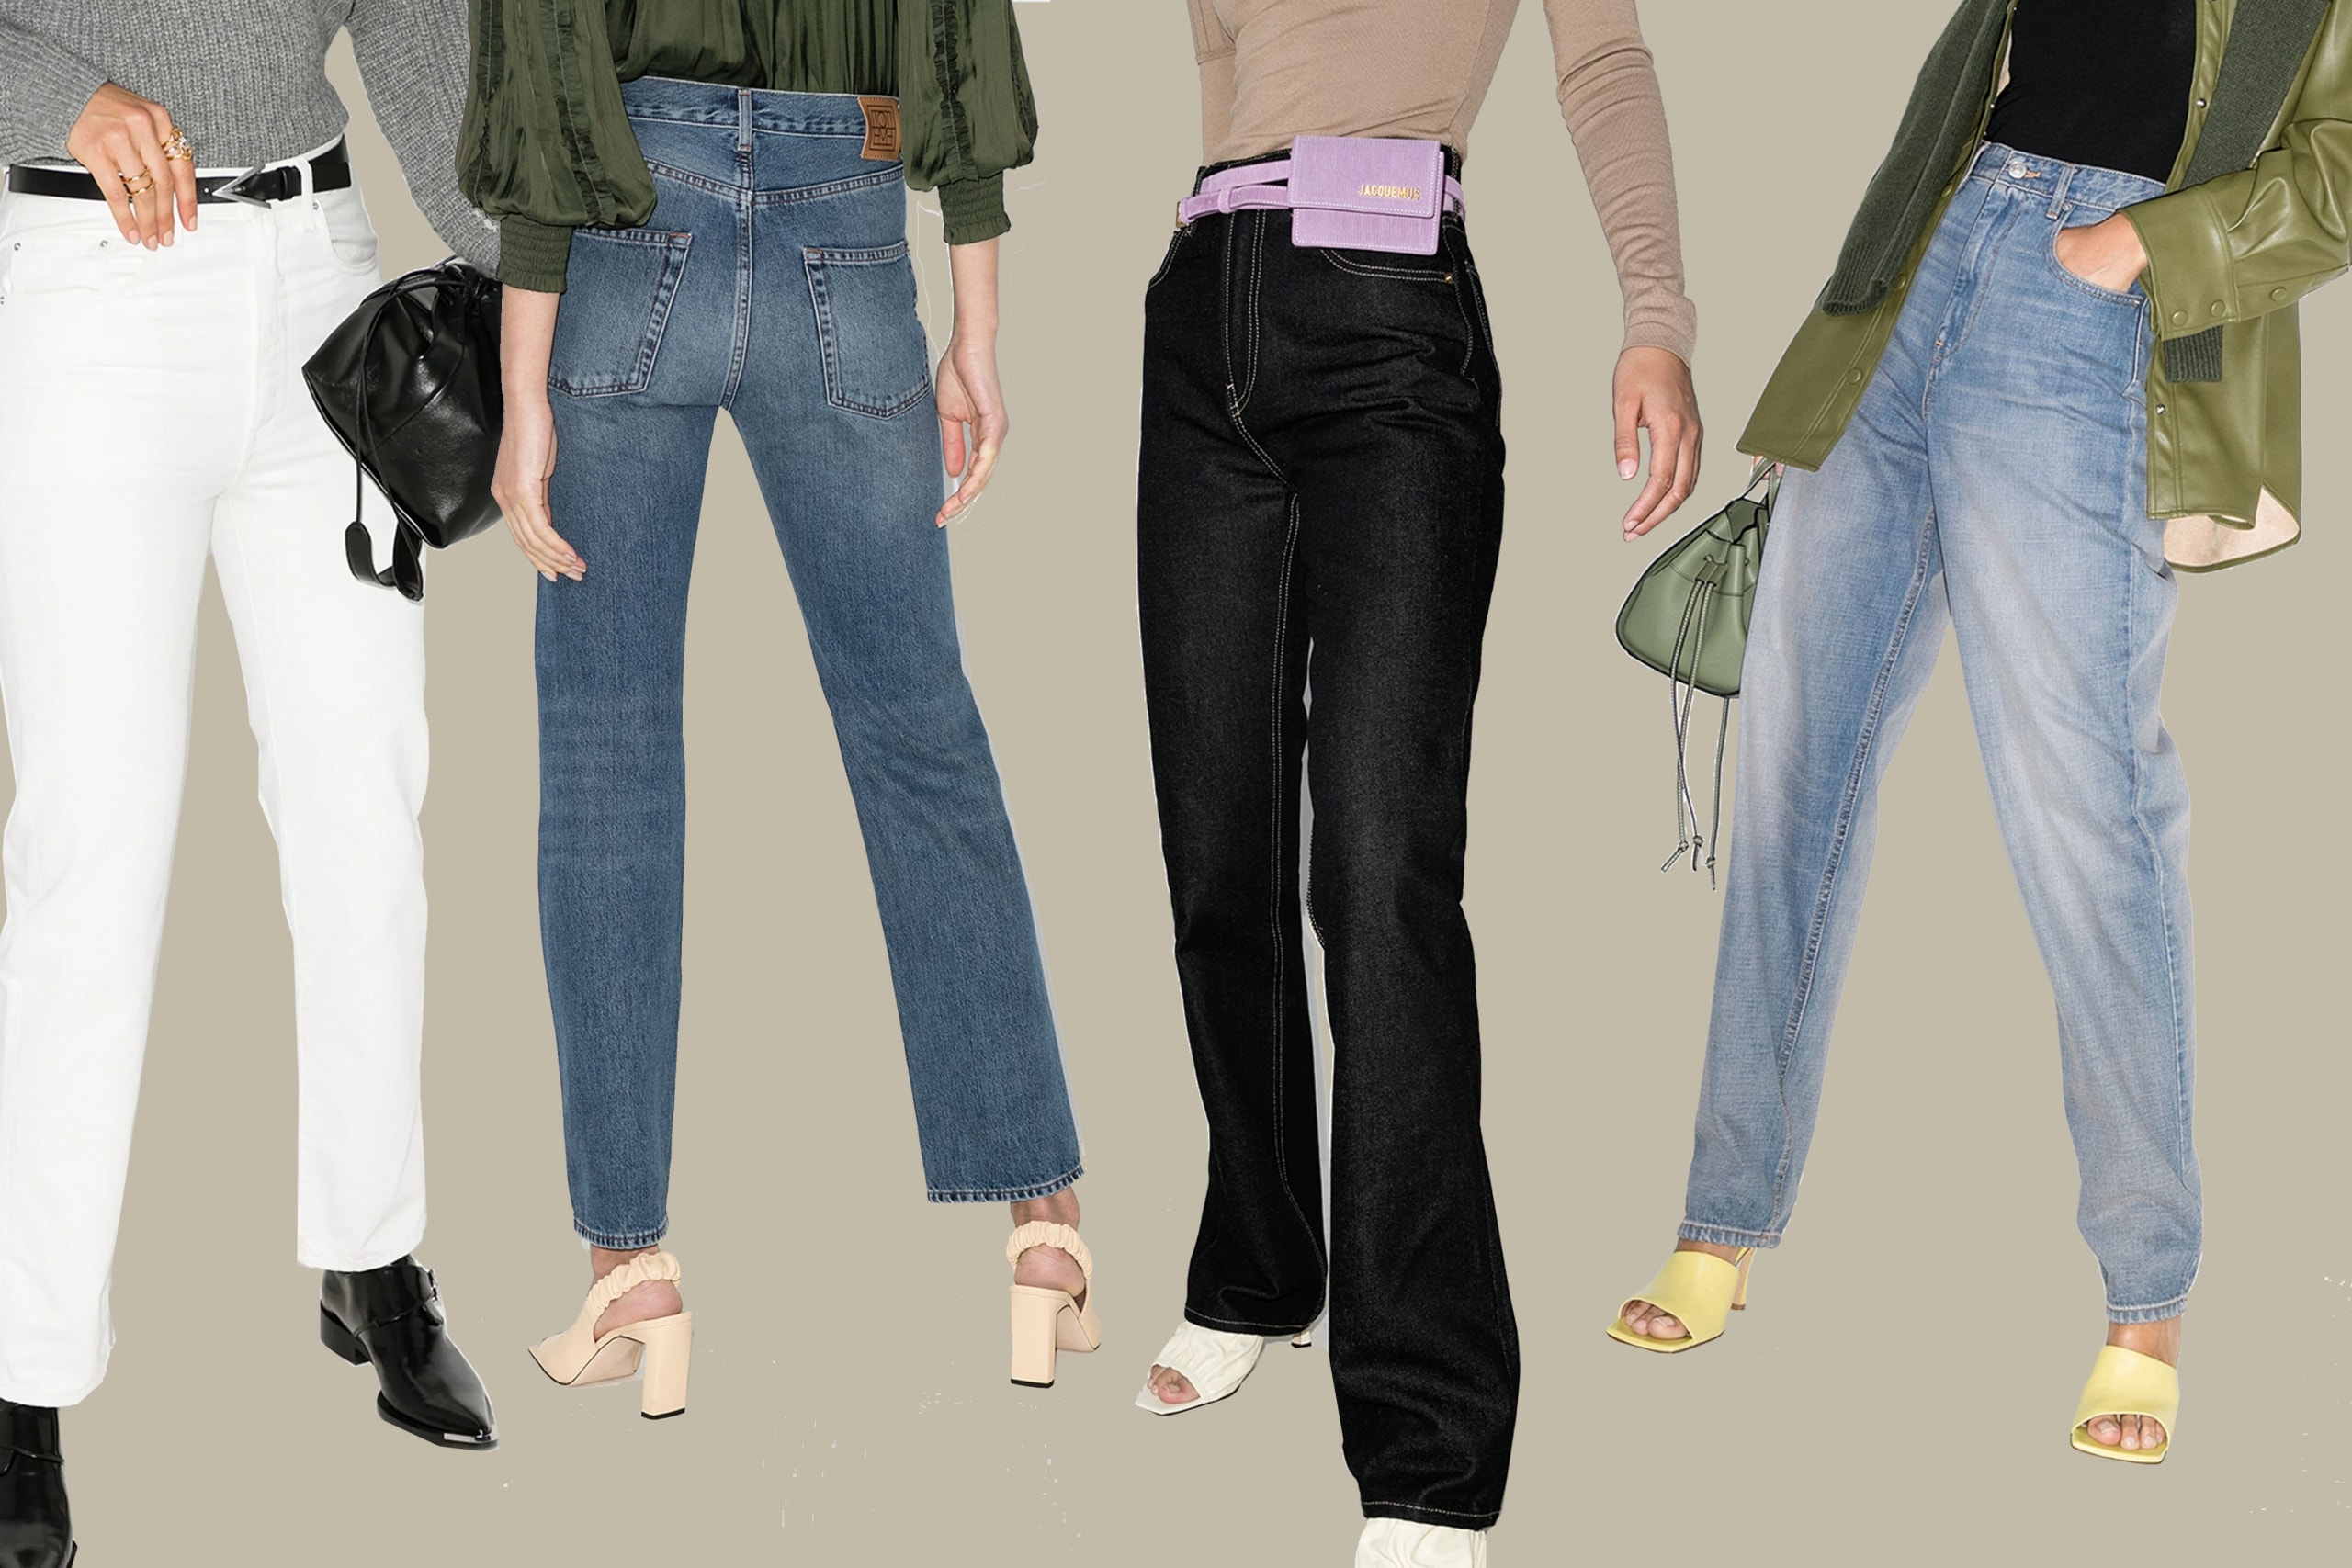 How To Buy Denim Jeans Tips And Tricks browns Fashion Advice Buyer styling brands